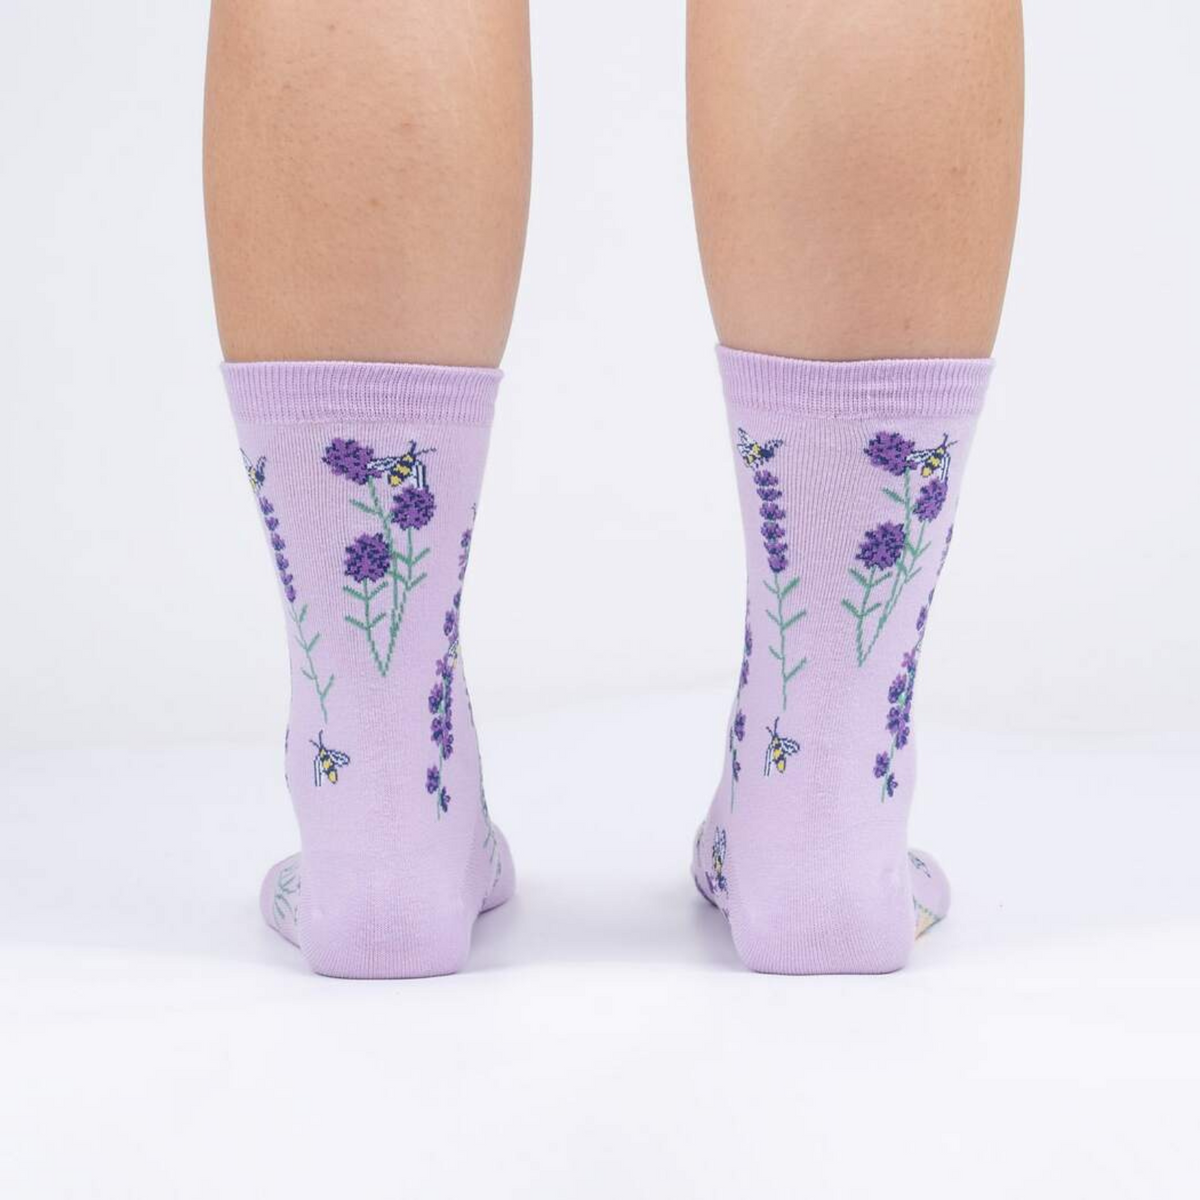 Sock It To Me Bees and Lavender women&#39;s socks featuring lavender socks with bees and lavender flowers all over worn by model from back